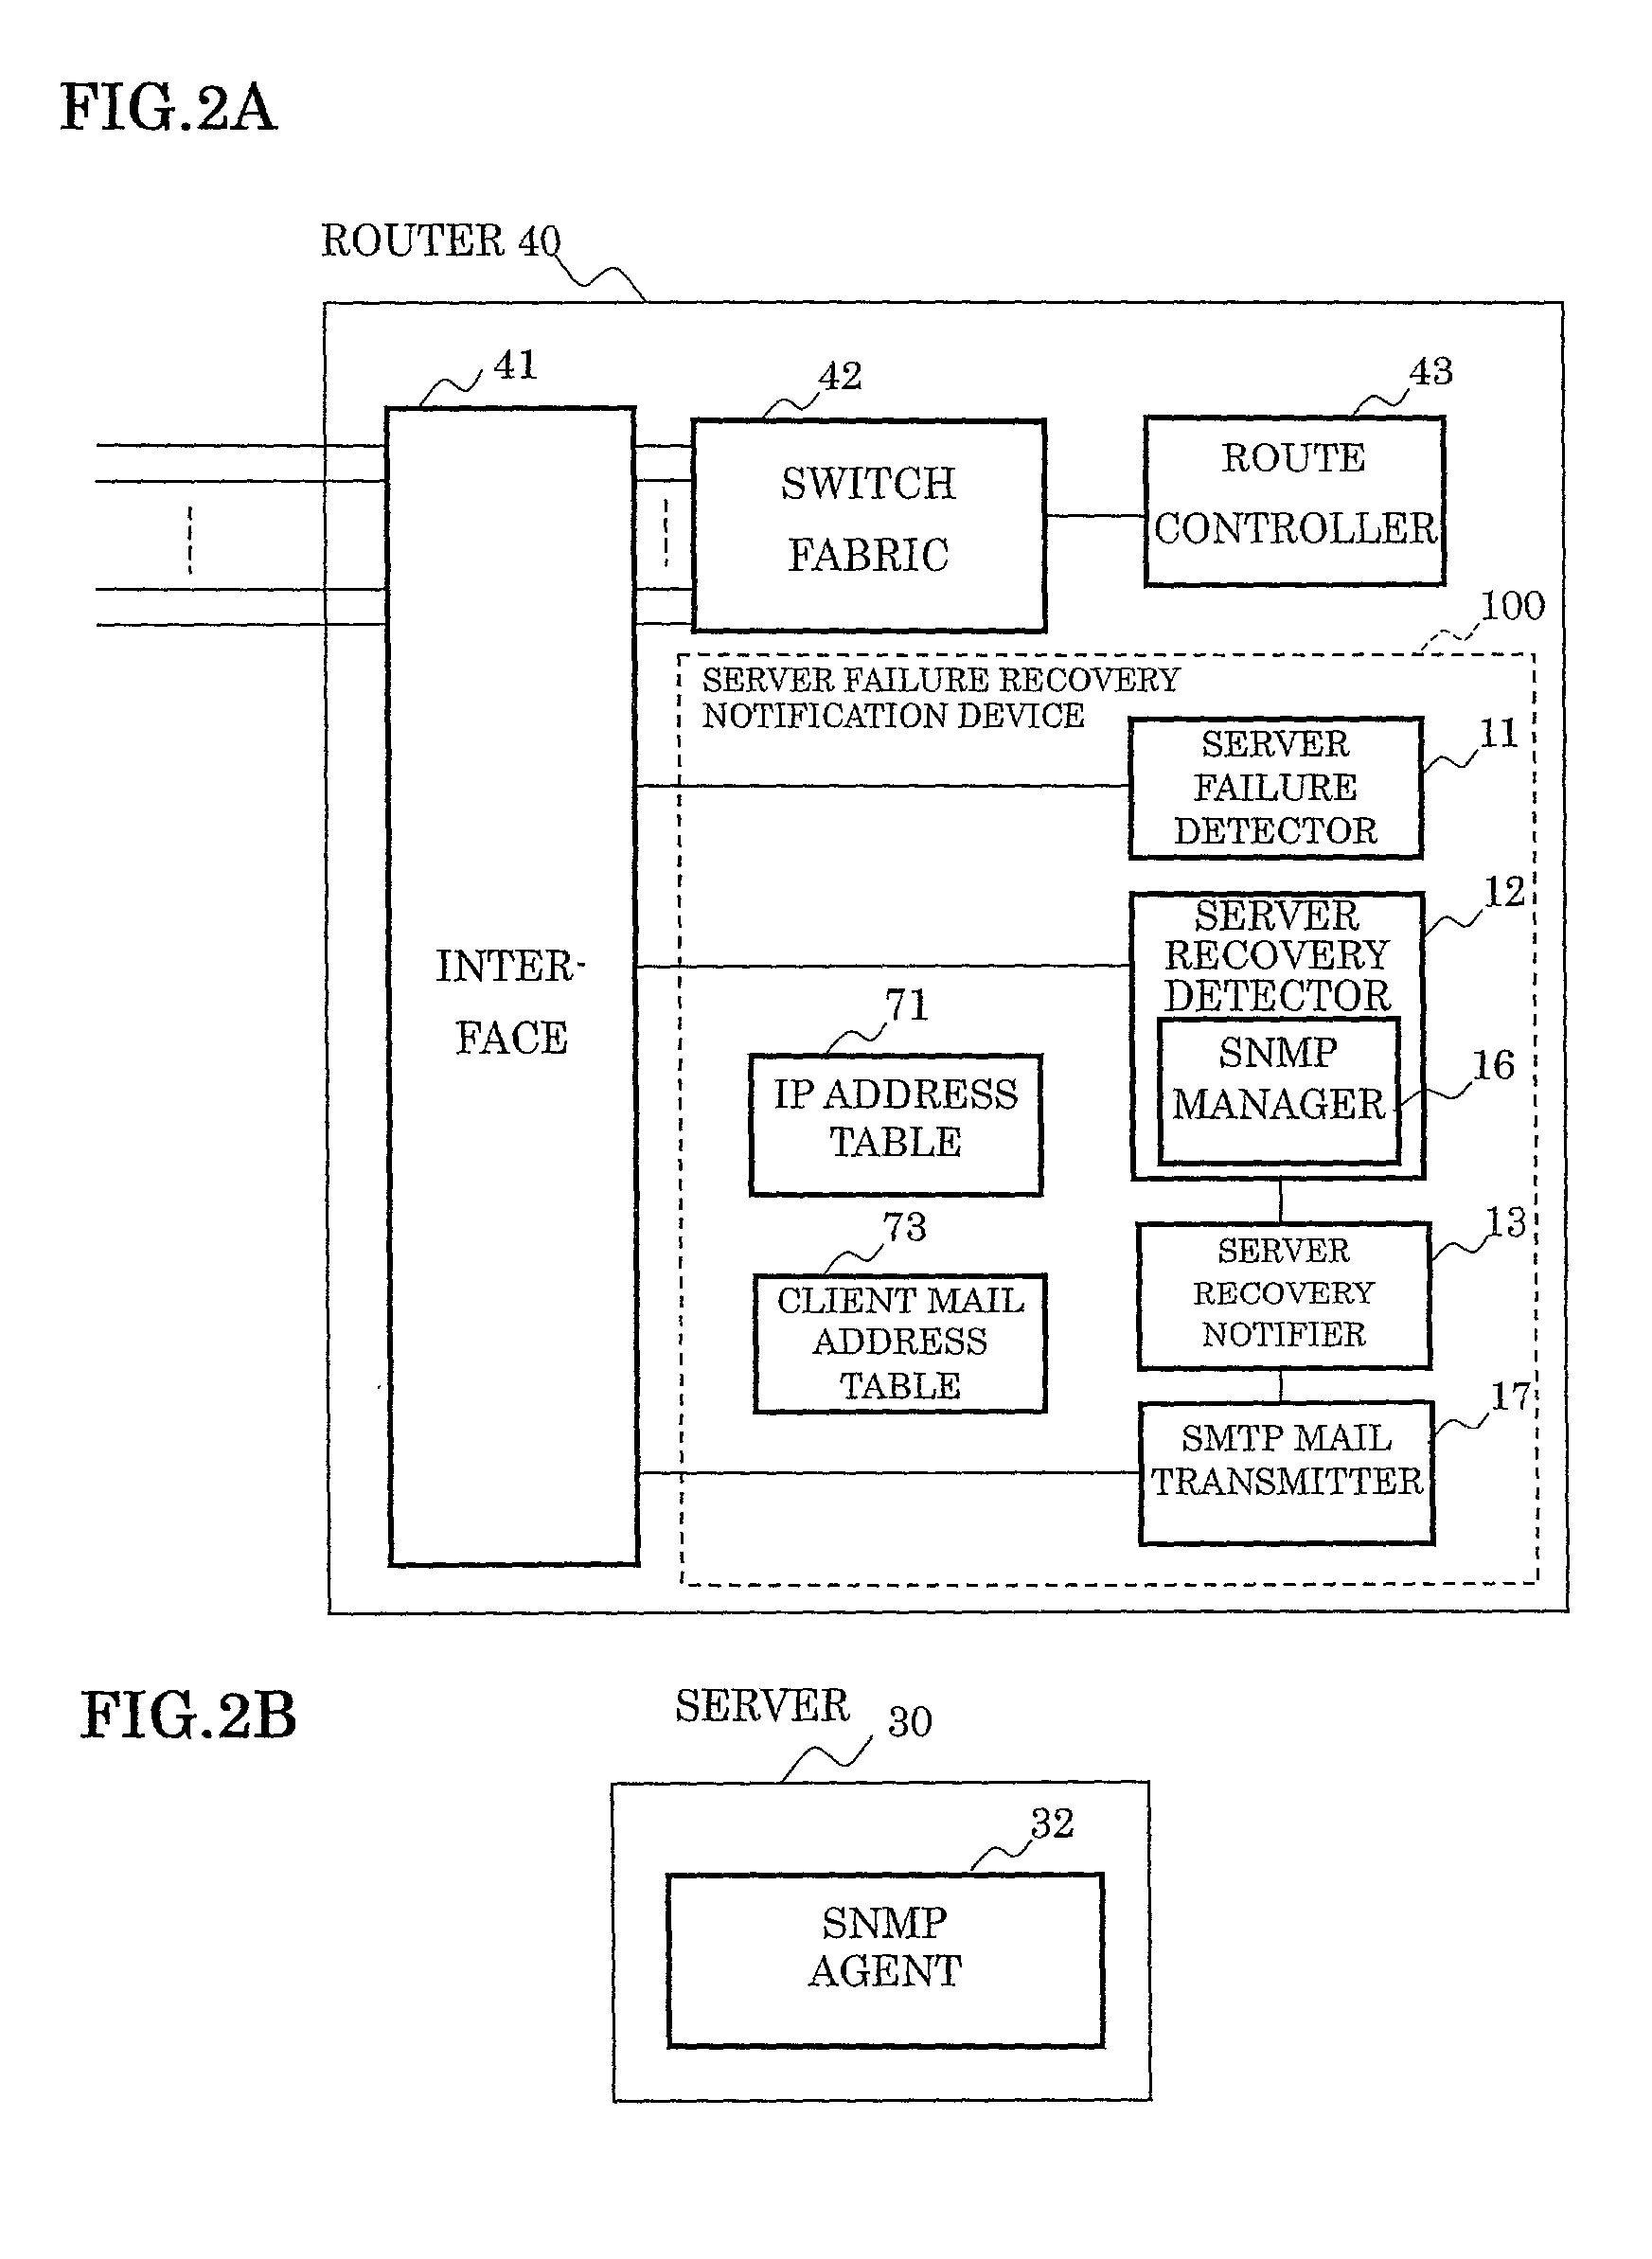 Method and device for notifying server failure recovery